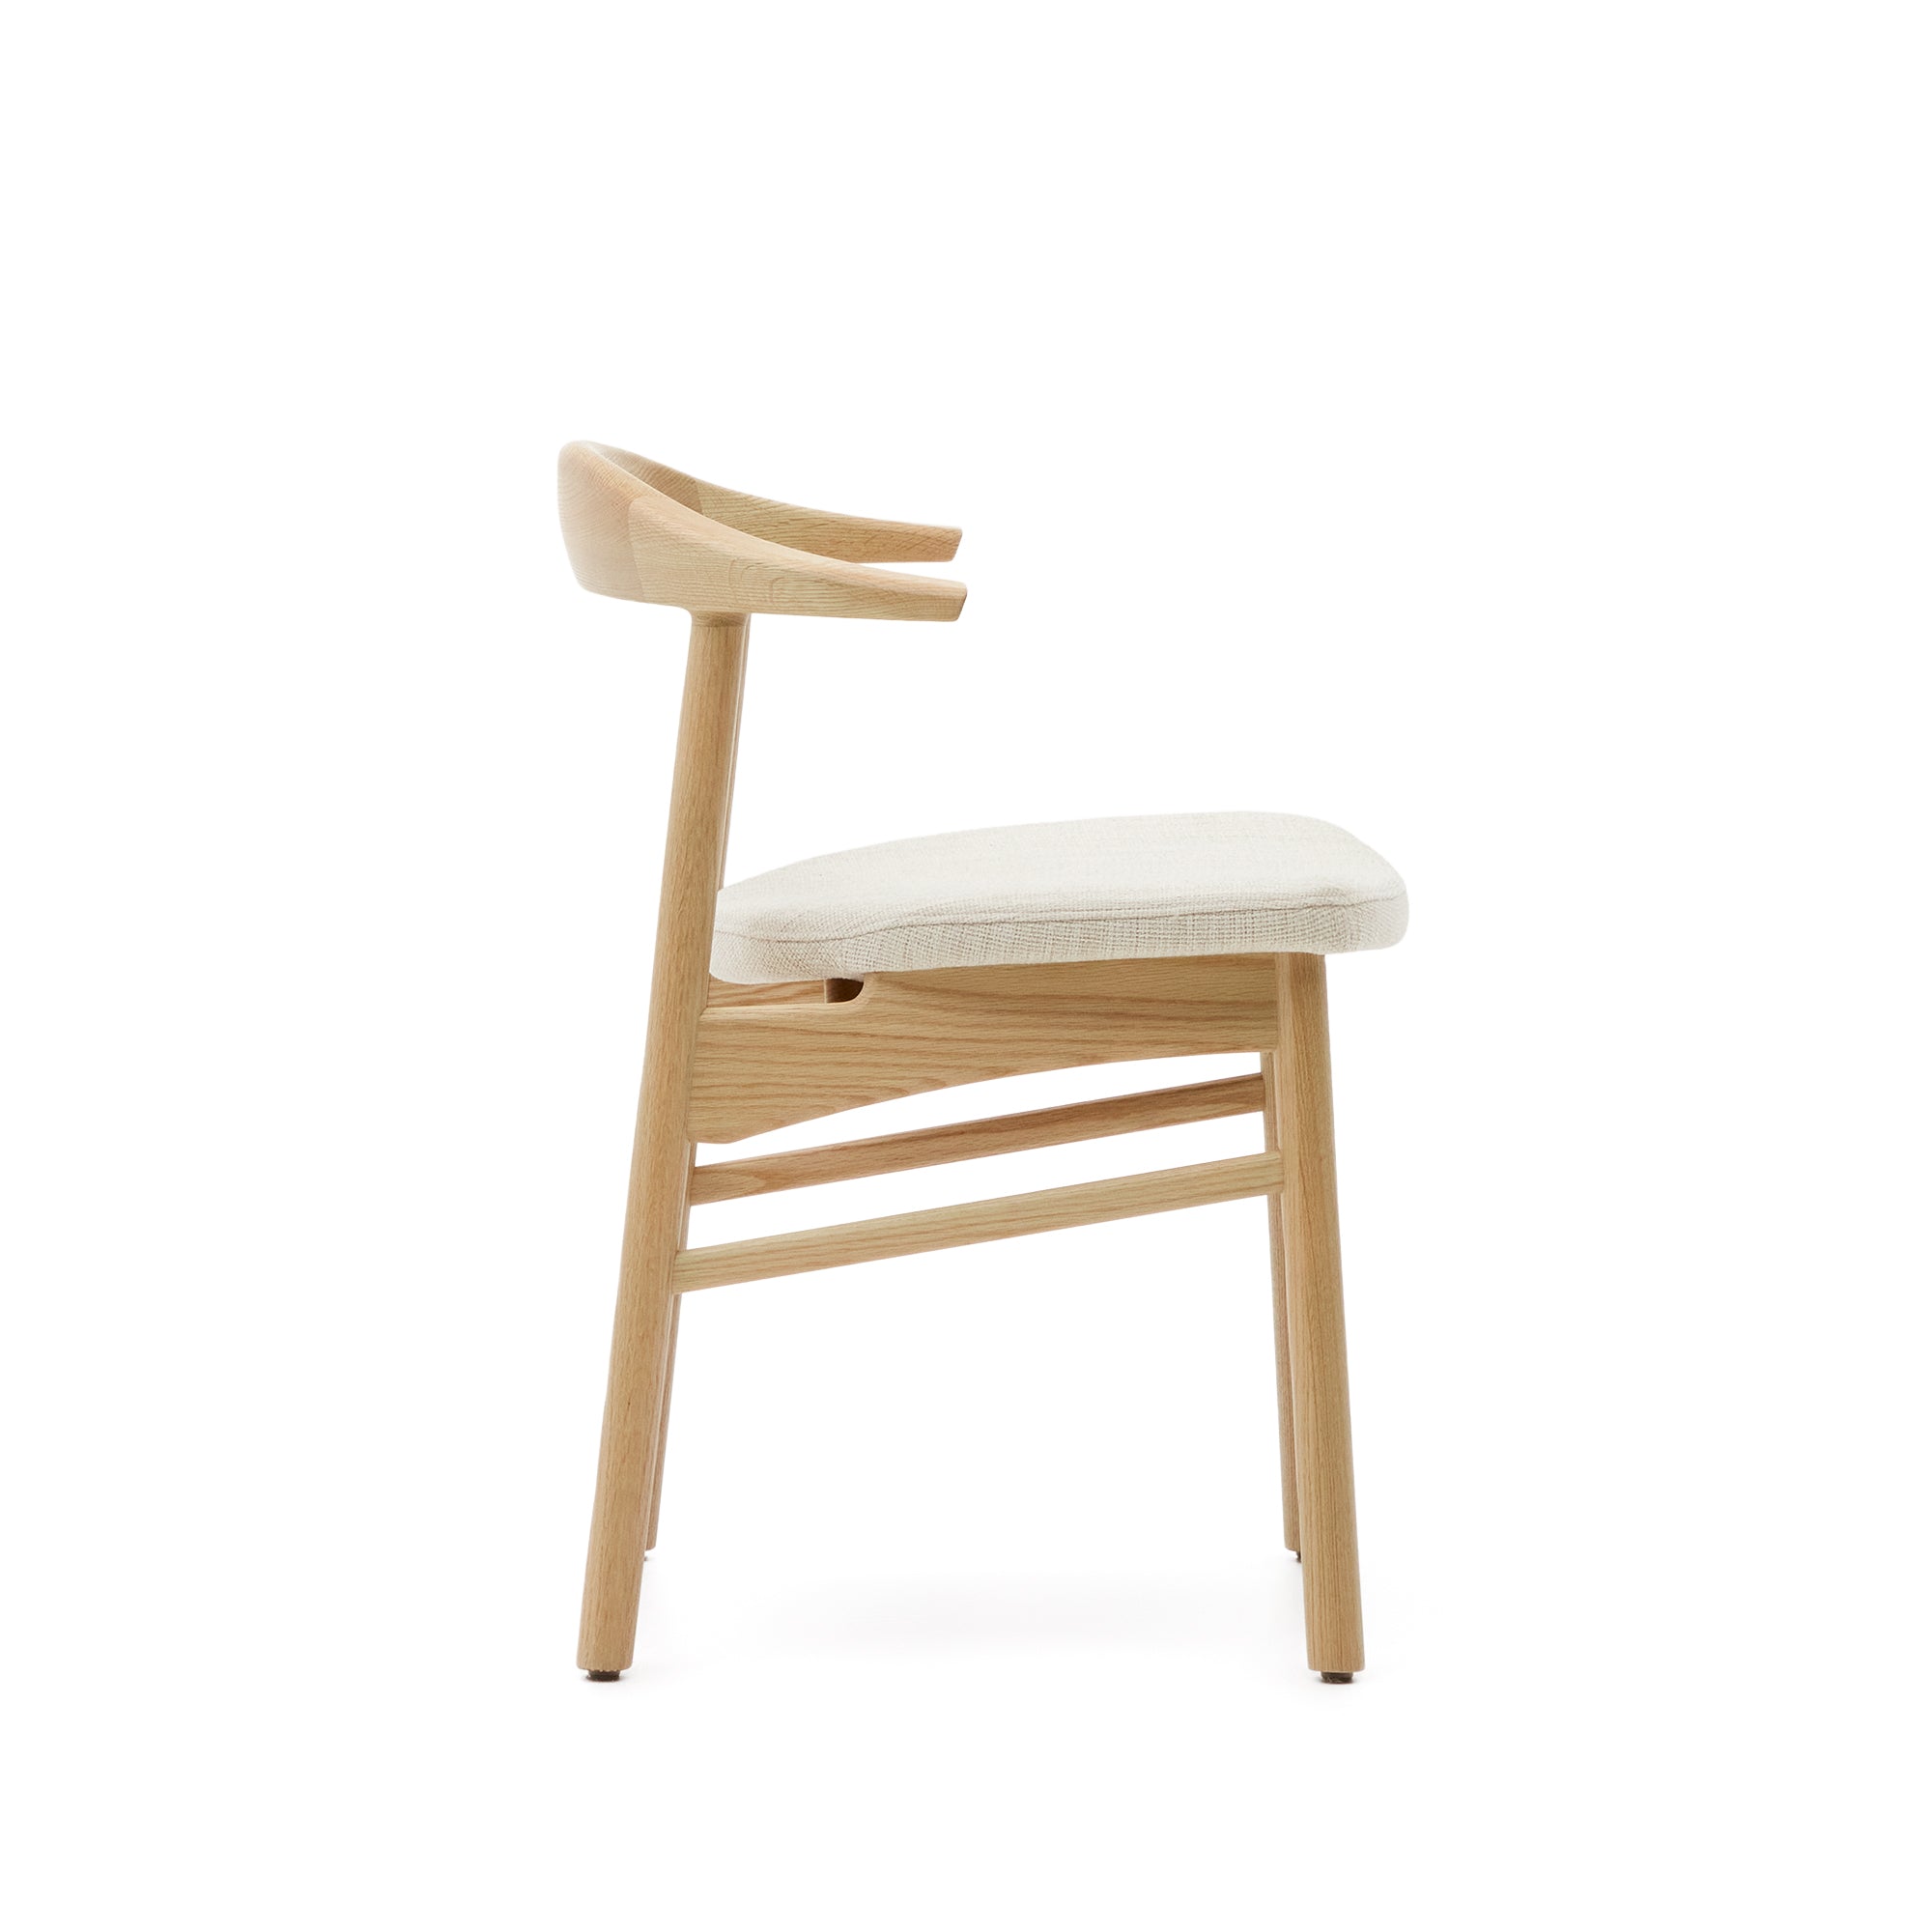 Timons chair with removable cover in beige chenille, solid oak with natural finish, FSC Mix Credit